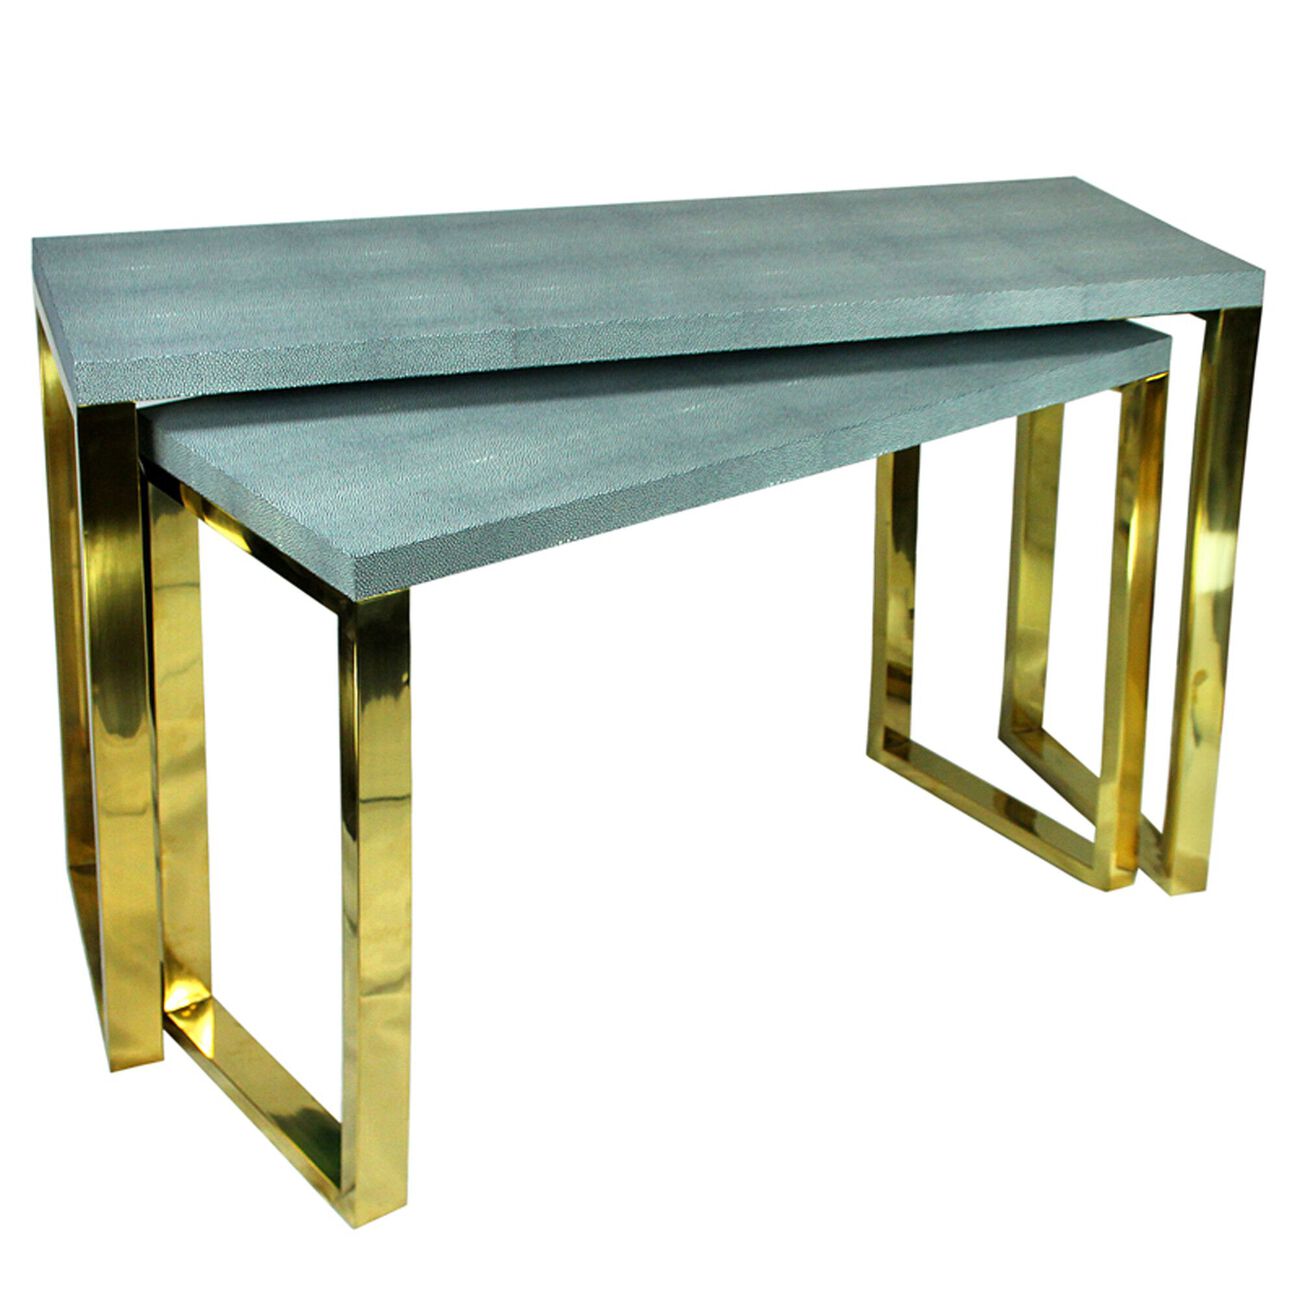 Rectangular Wood and Metal Console Tables, Gray and Gold, Set of 2.